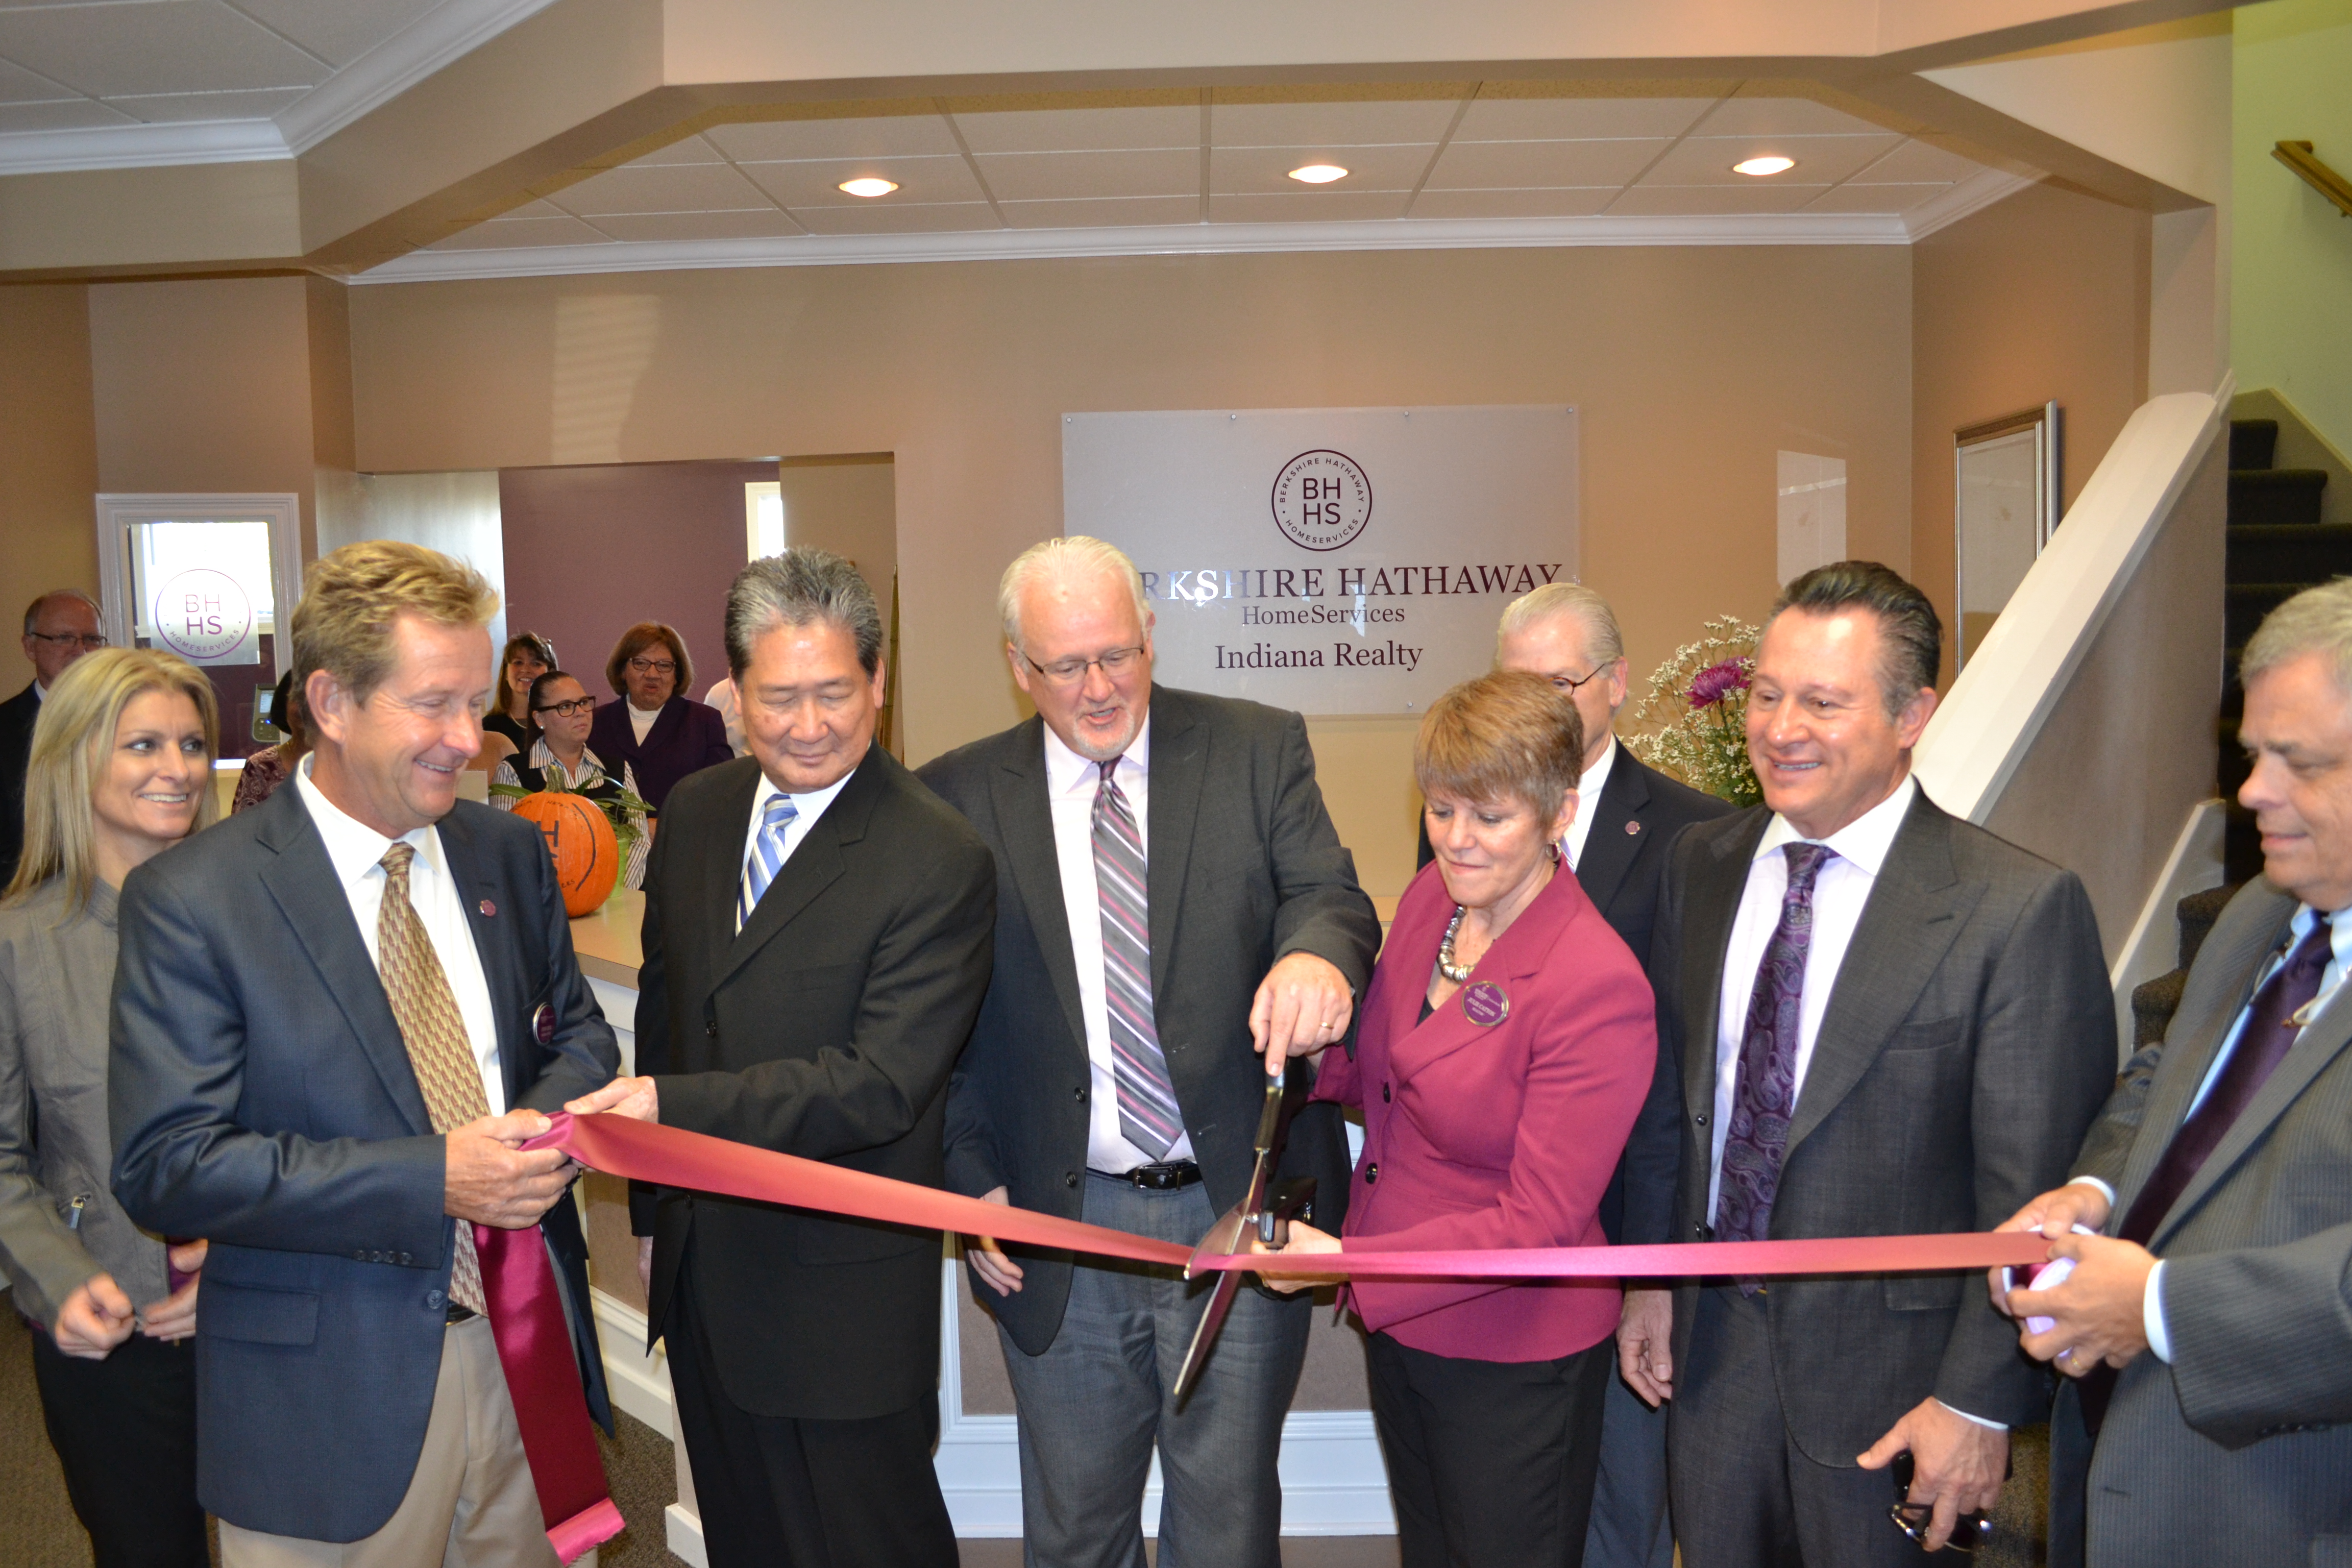 The former Prudential Realty office at 8402 E. 116th St. in Fishers became a Berkshire Hathaway office on Oct. 8. (Photo by John Cinnamon)